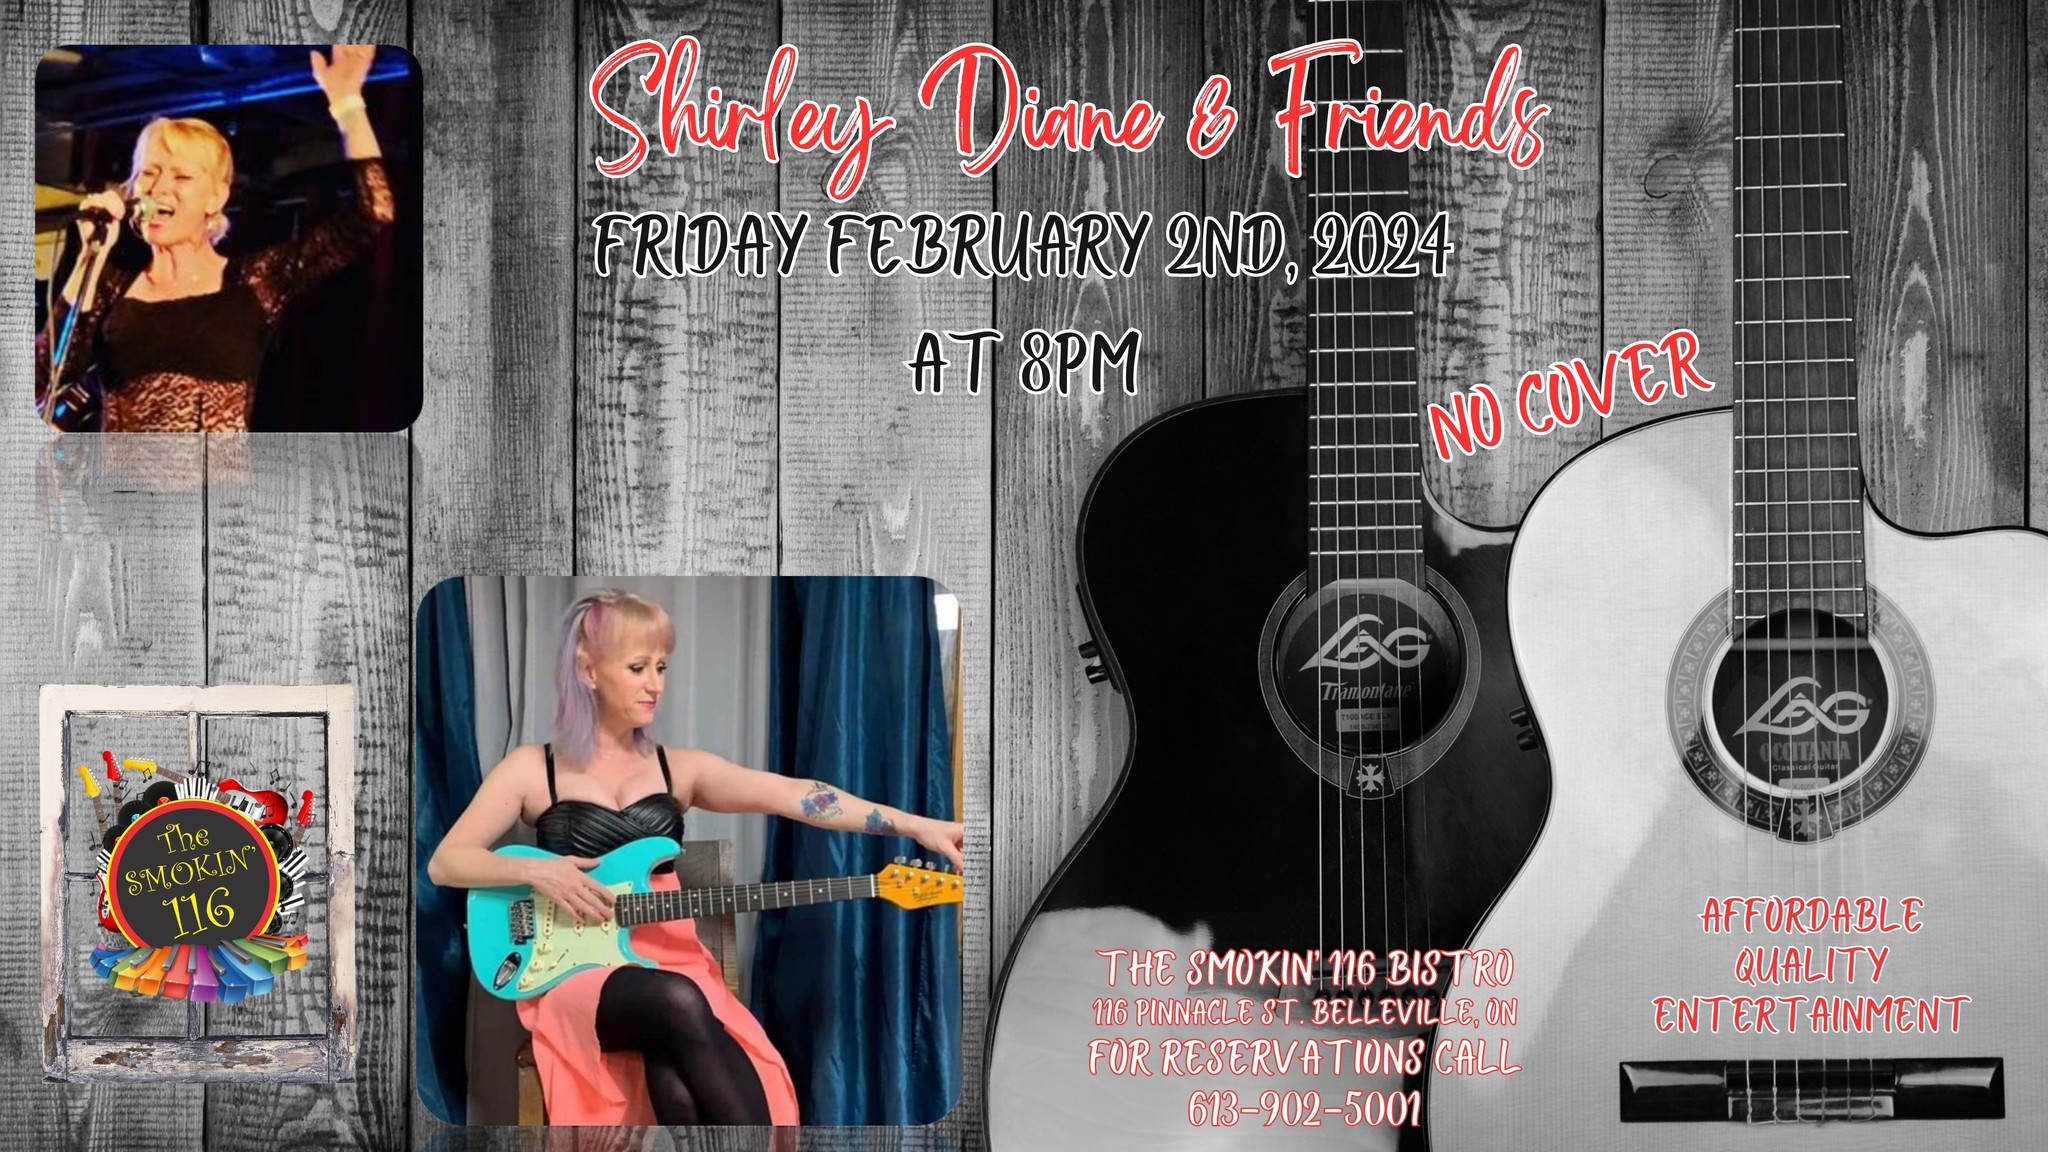 concert poster with images of 2 guitars and 2 photos of the performer.